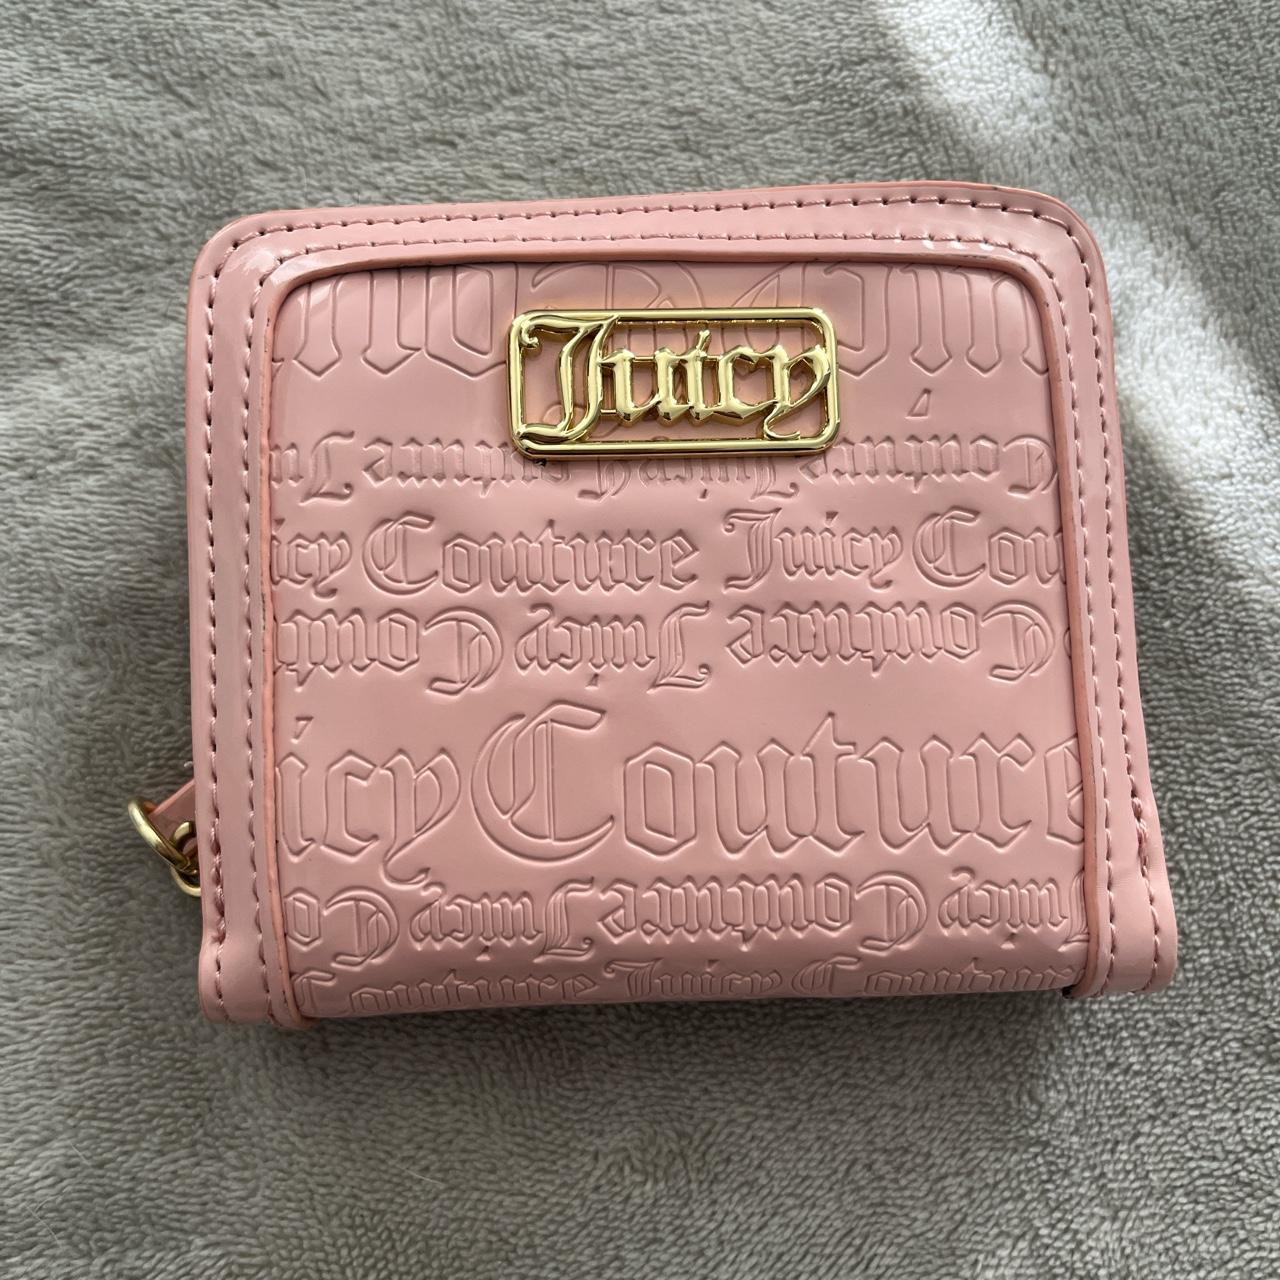 Hot Pink LV wallet very cute perfect hand fitting to - Depop